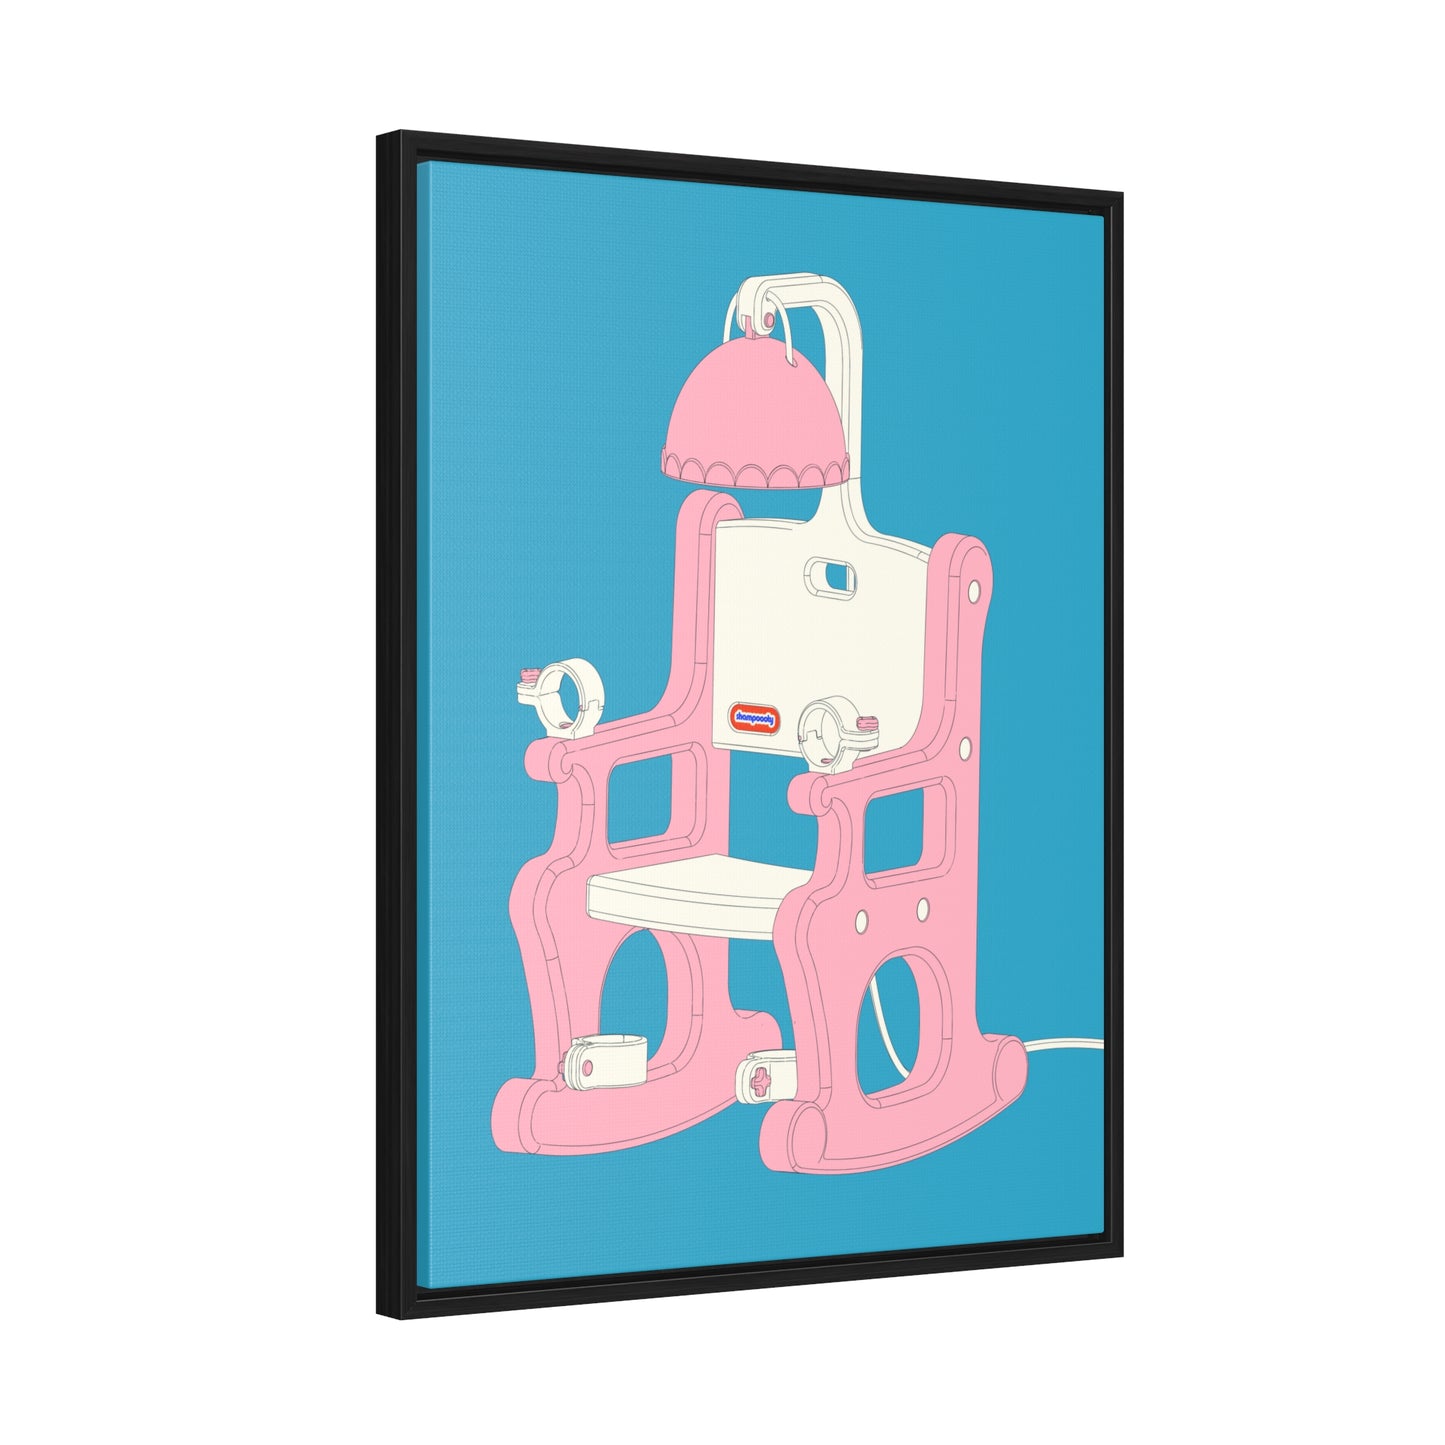 Electric Chair Gallery Wrap (Illustrated Blue) Framed